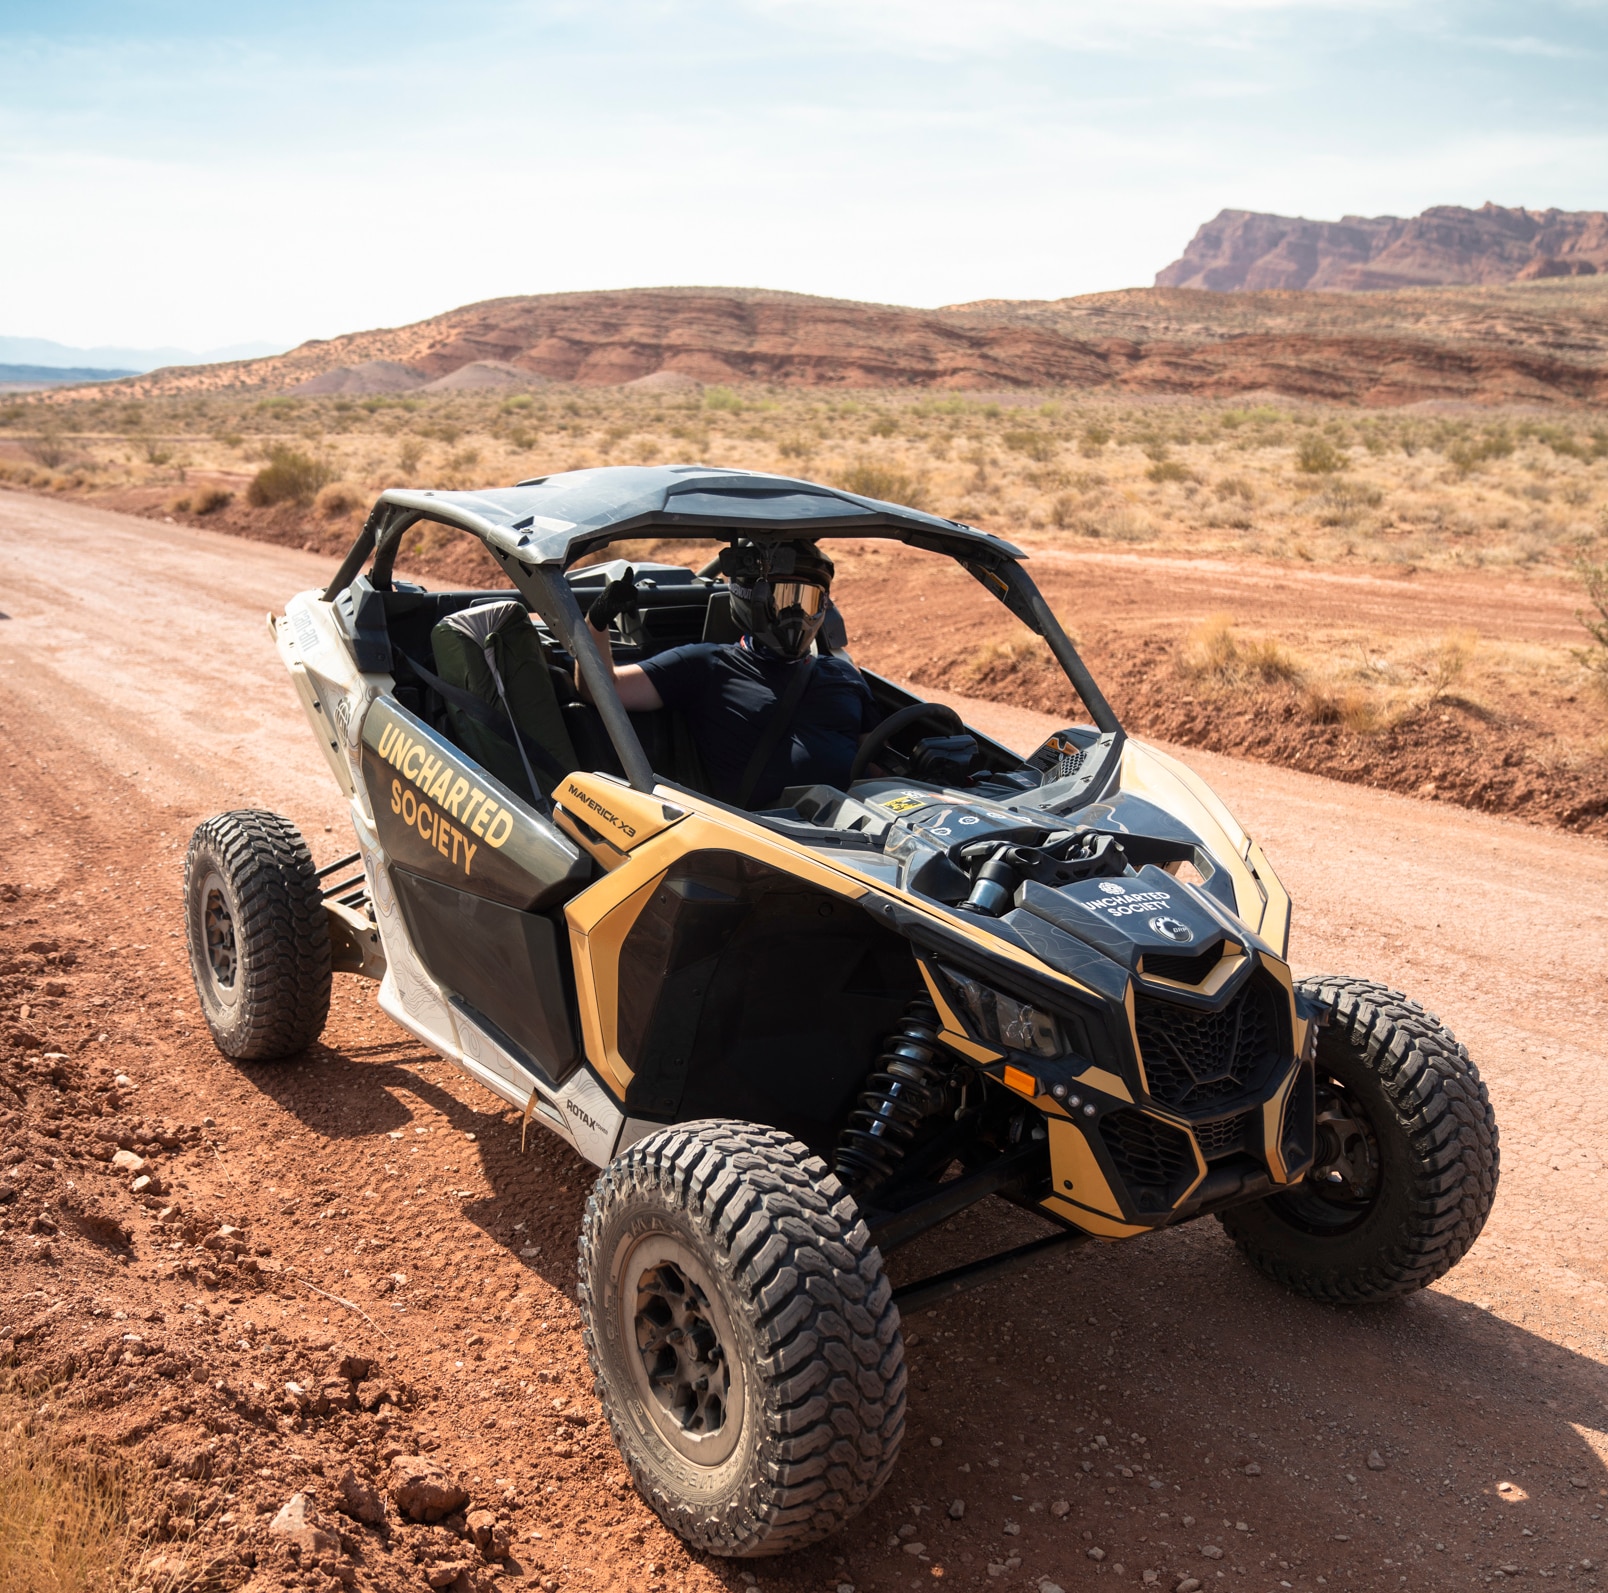 Uncharted Society branded Maverick-X3 Off-Road Side-by-Side vehicle